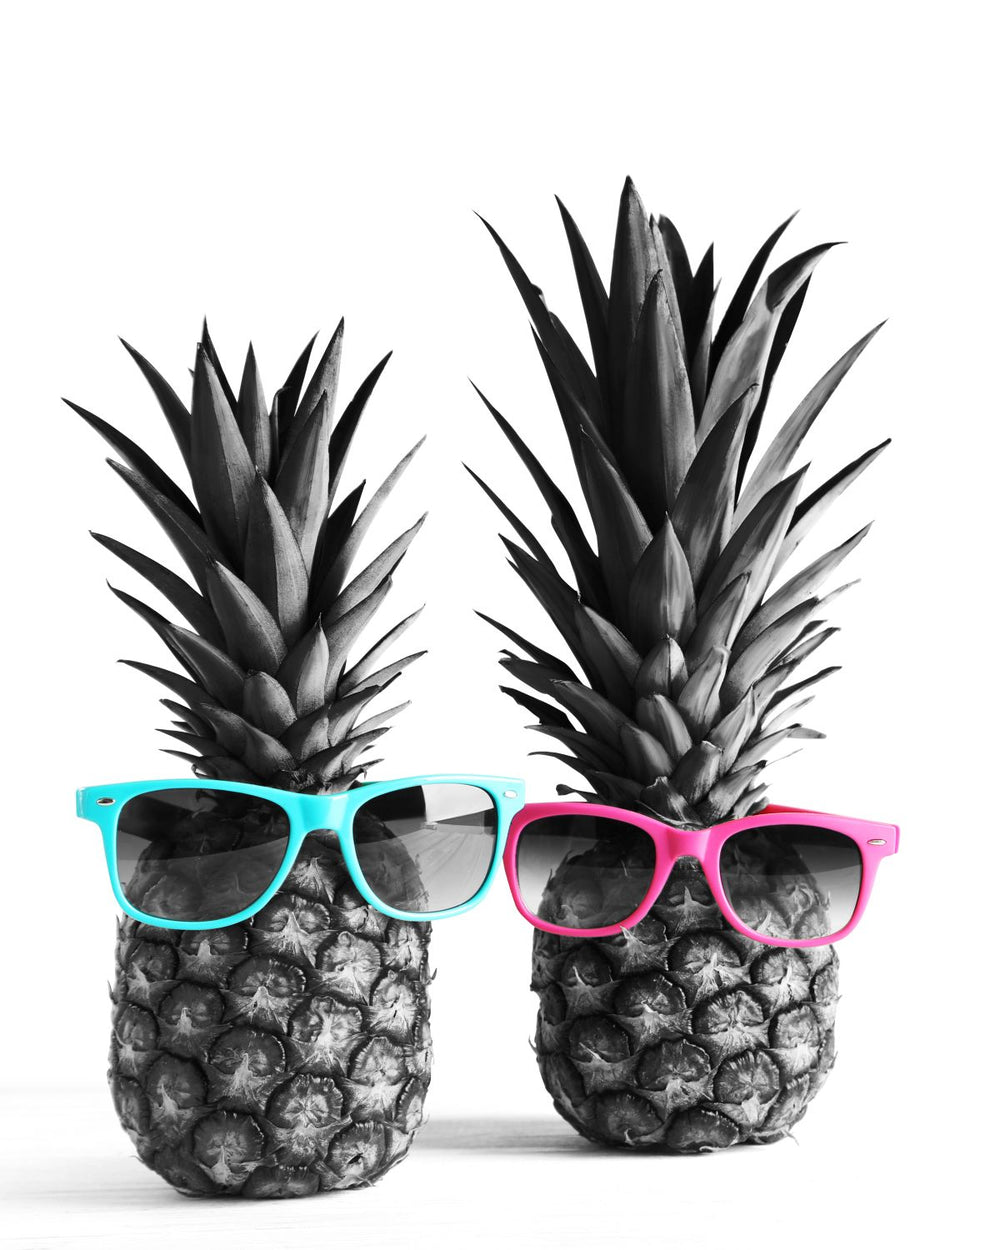 Two Chic Pineapples